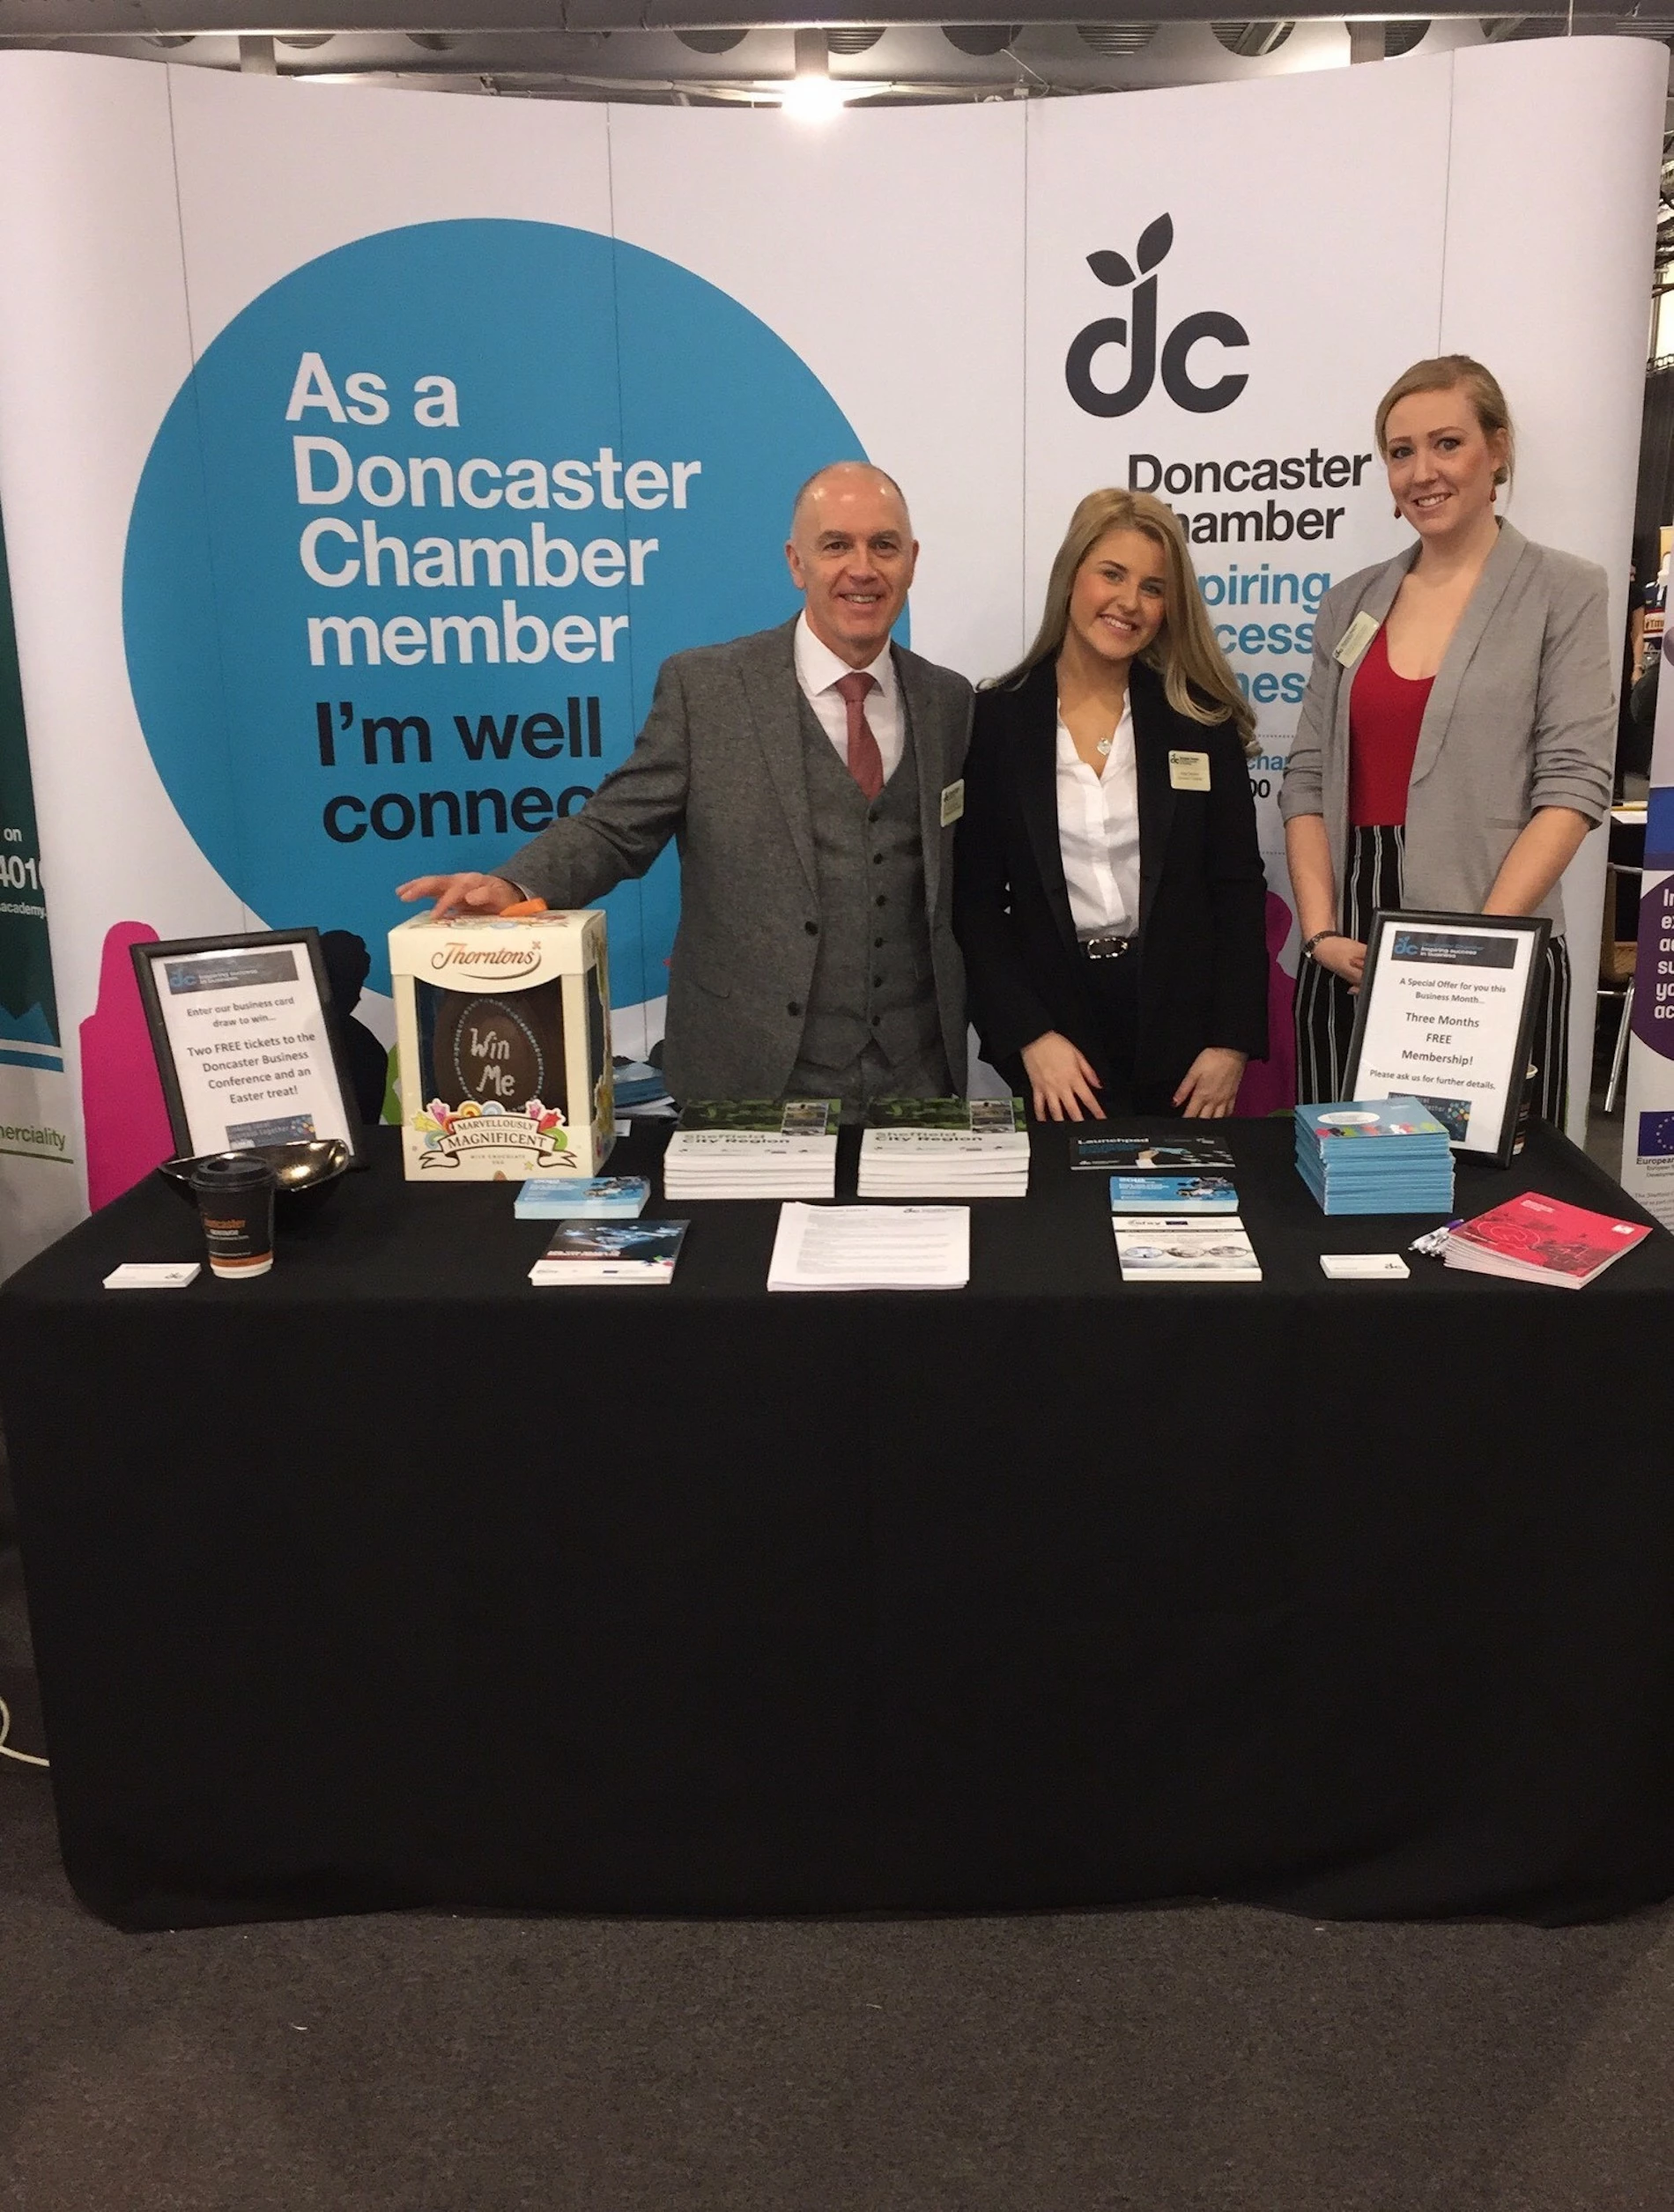 Doncaster Chamber staff at the Business Showcase in February 2018